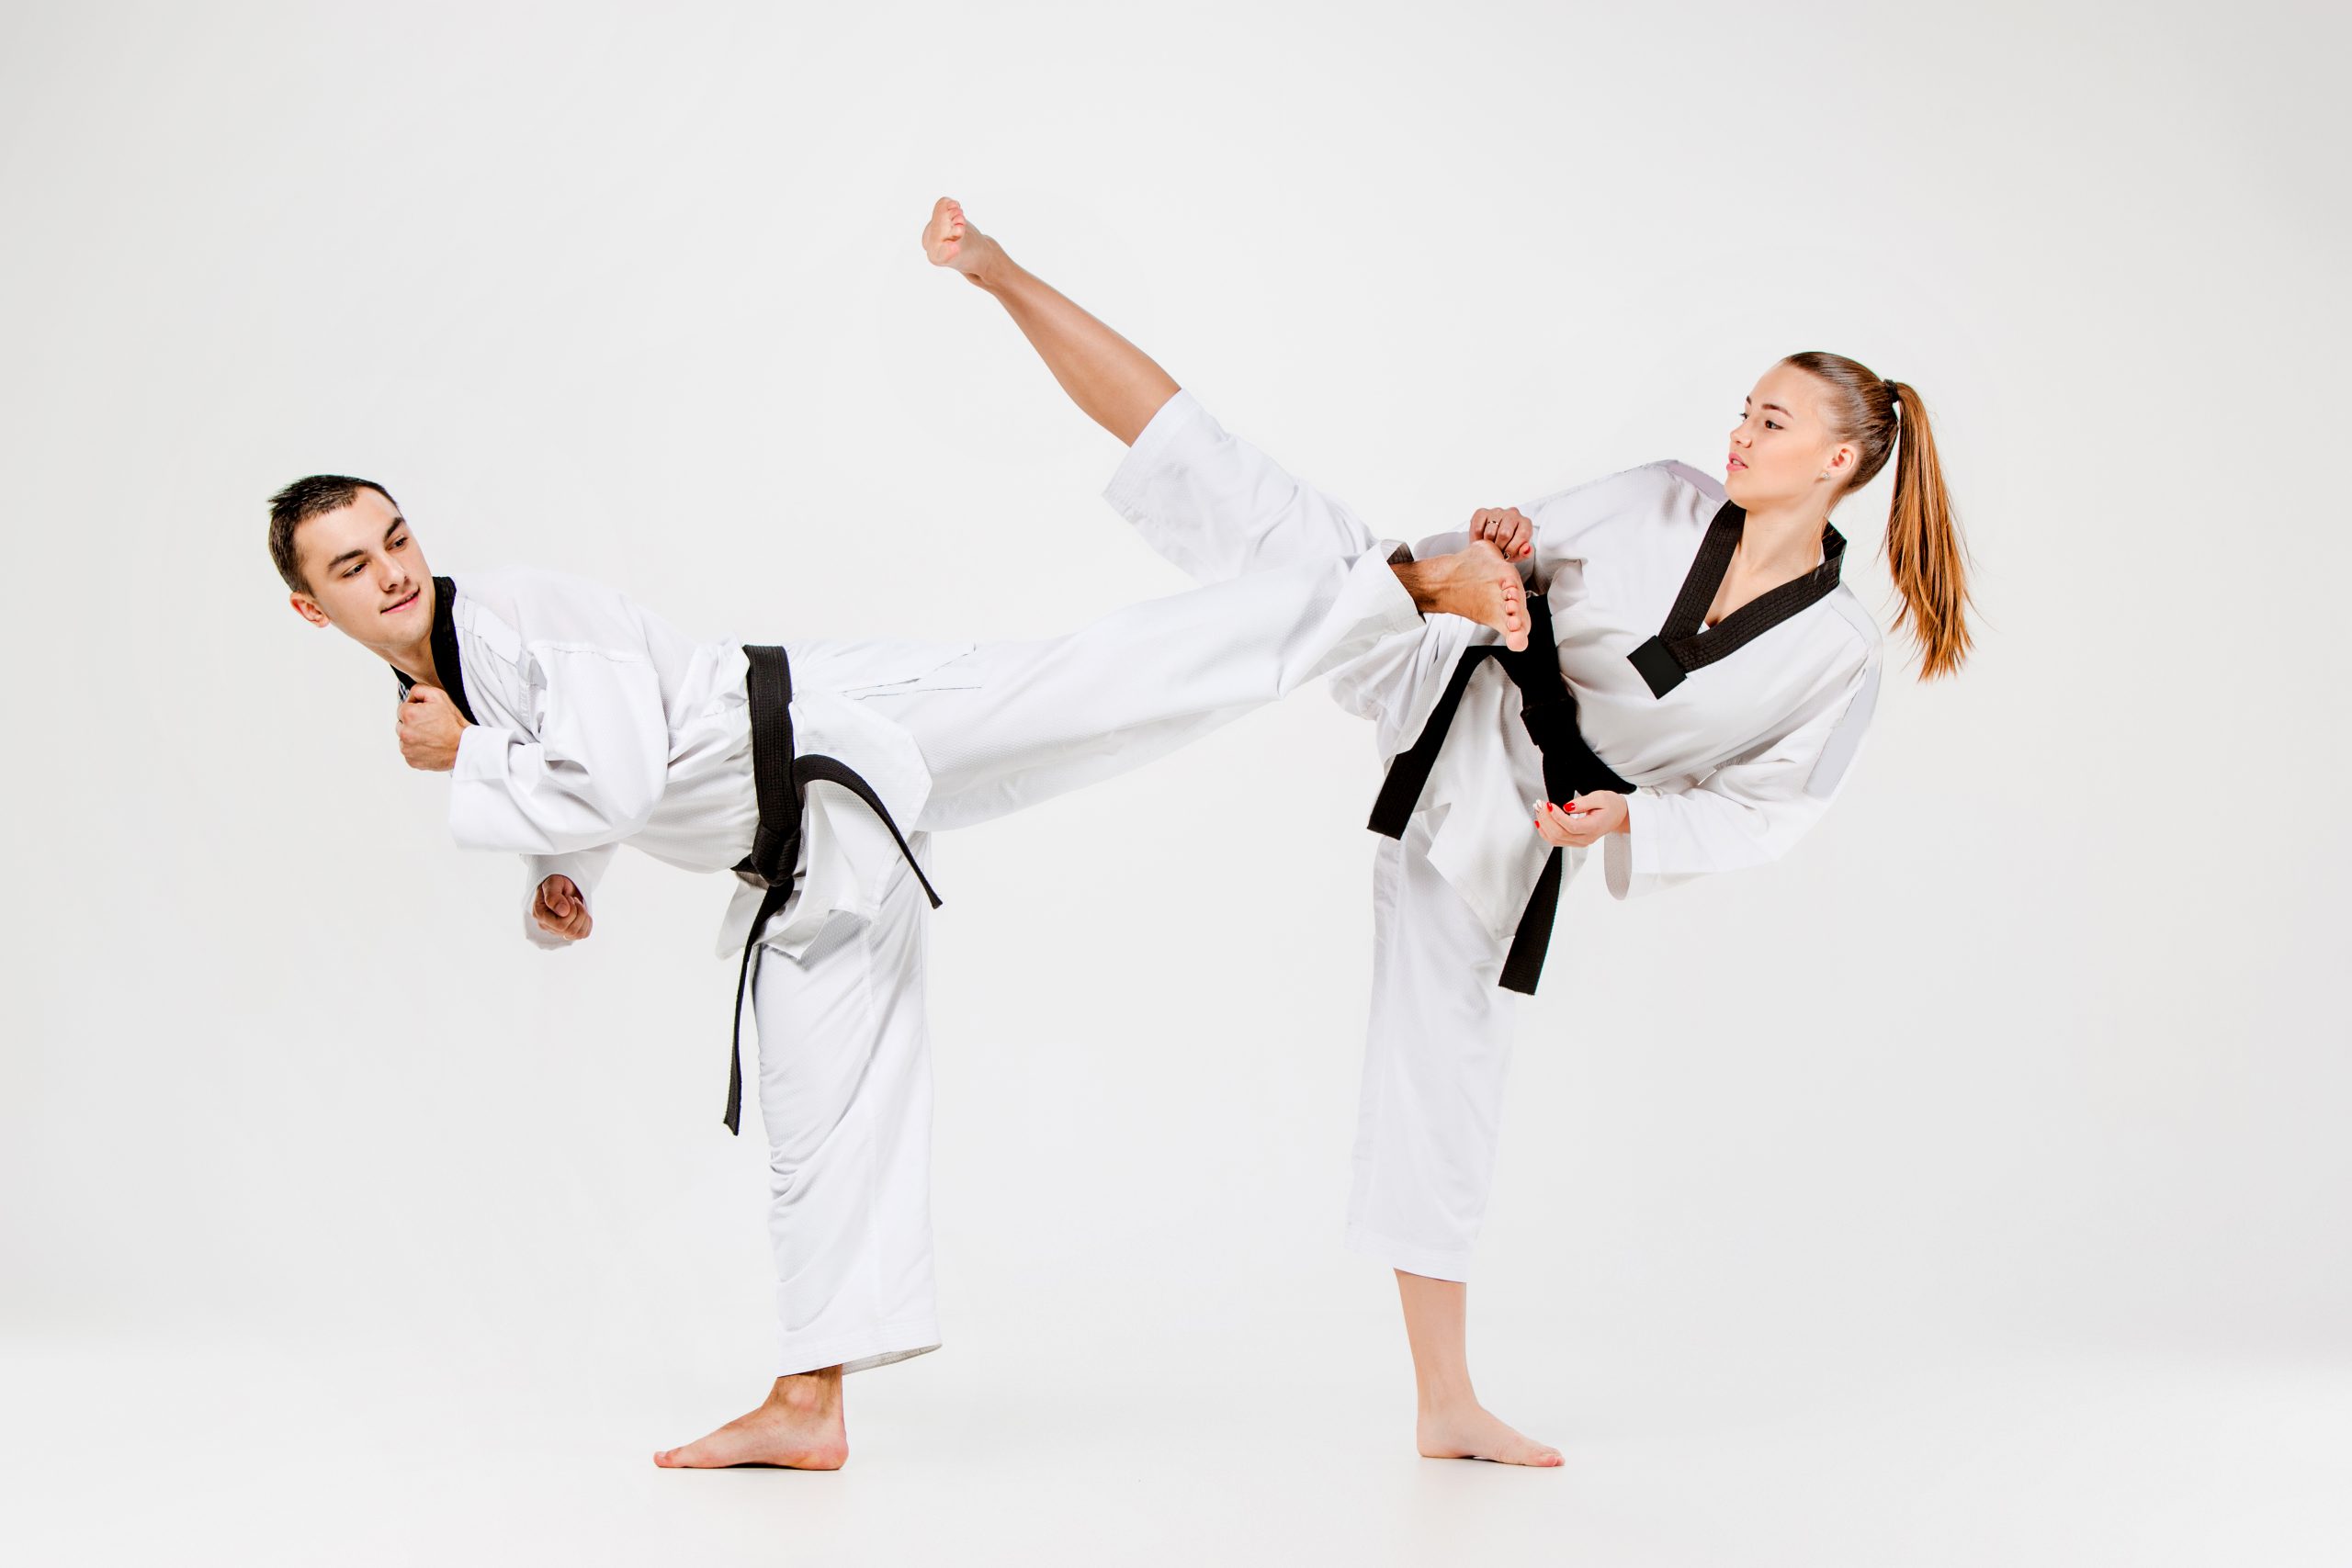 The karate girl and boy in white kimono and black belt training karate over gray background.